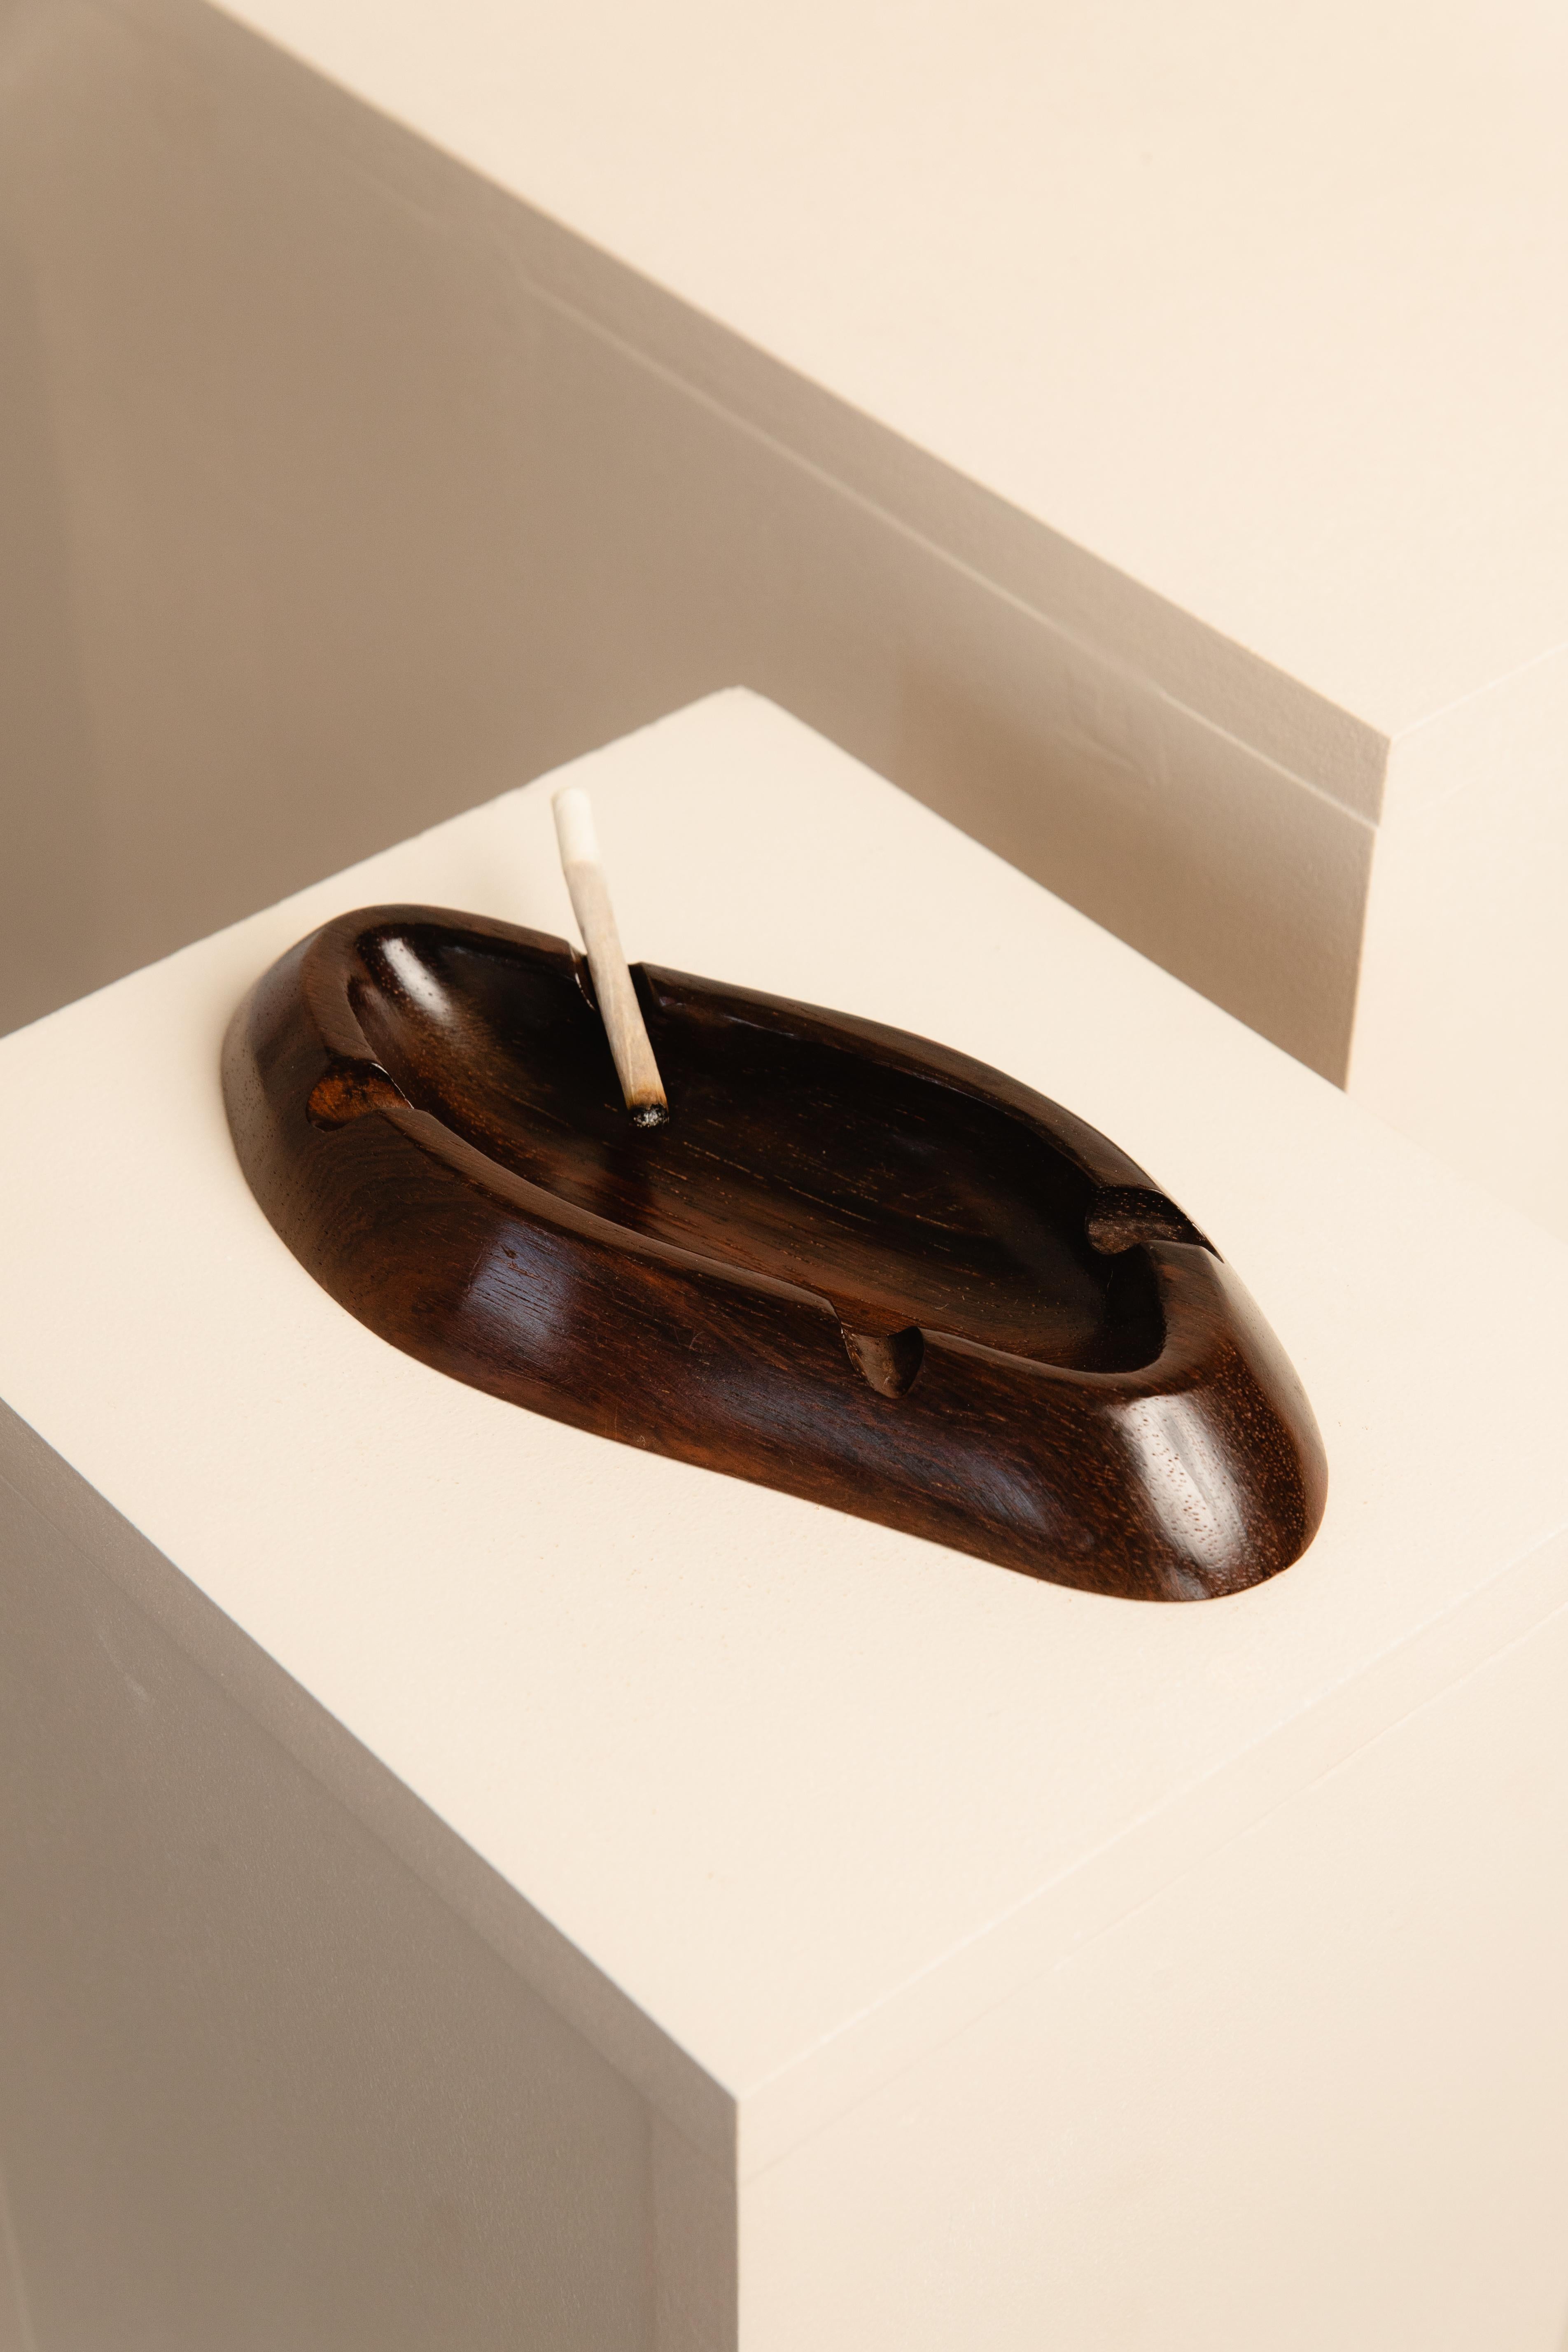 Mid-Century Modern Brazilian Midcentury Ashtray in Solid Rosewood by Jac-Art, 1970s For Sale